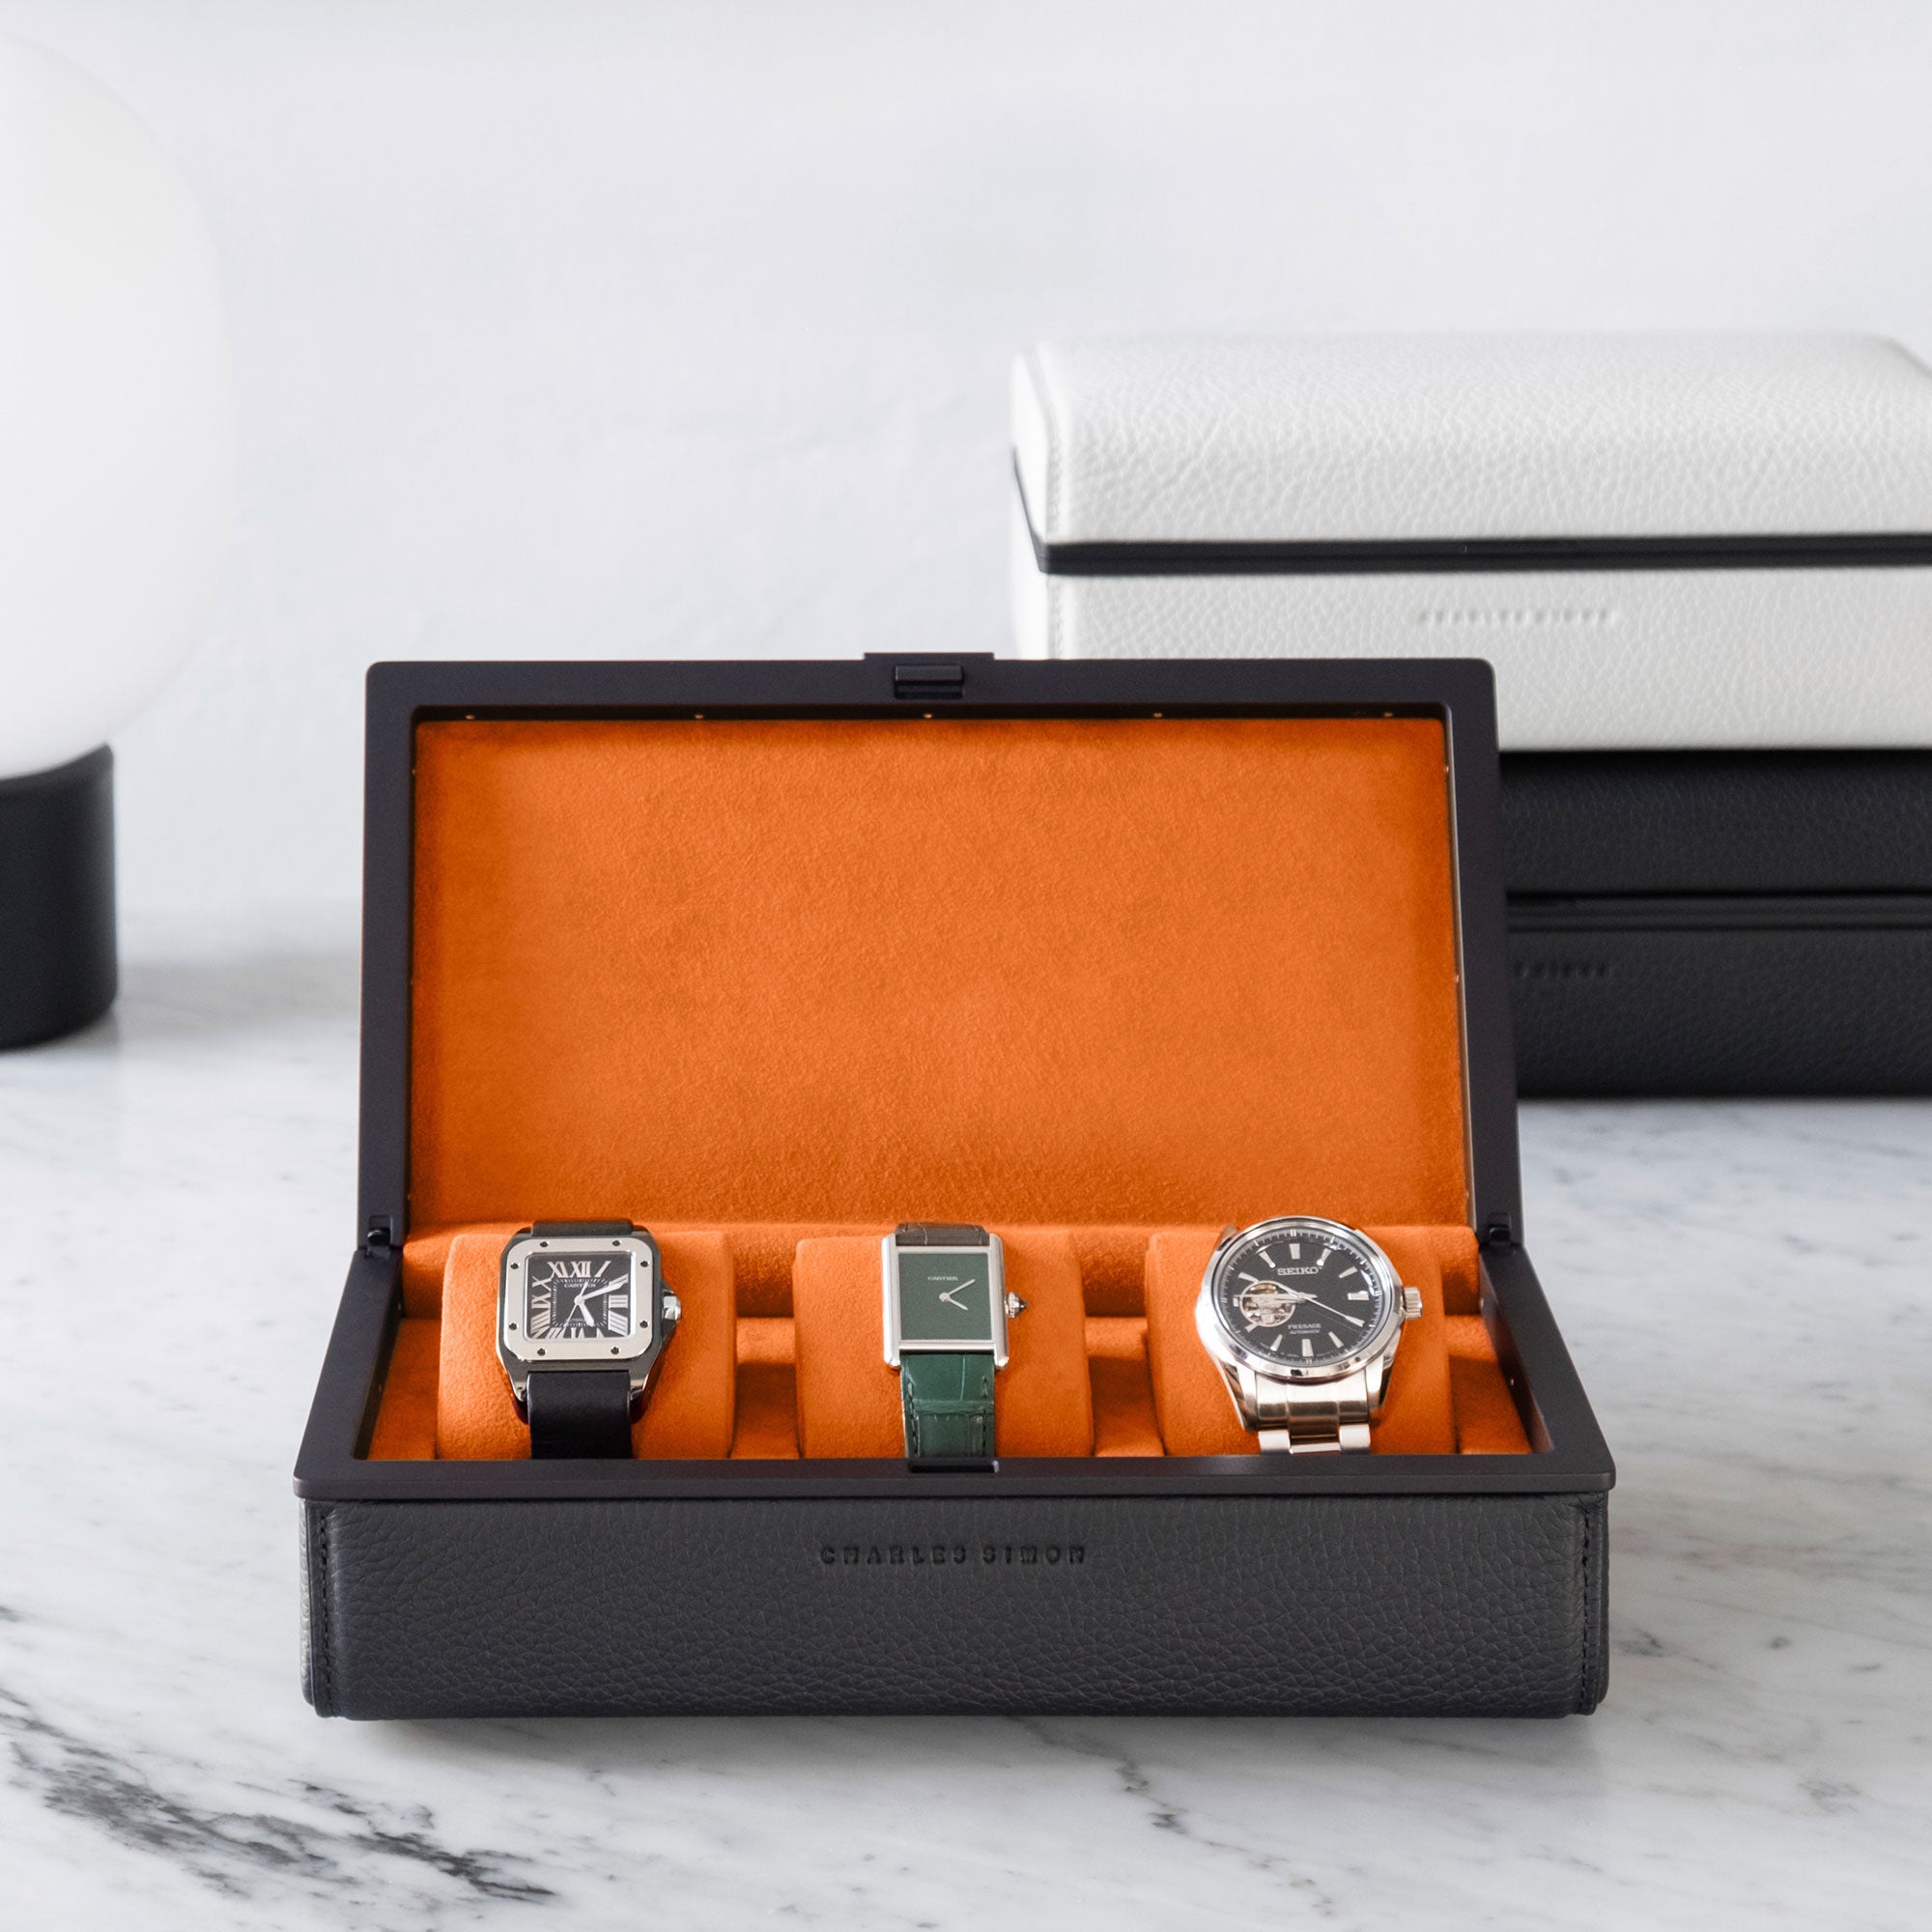 Lifestyle shot of open Eaton 3 Watch case in black leather with black anodized aluminum and soft papaya Alcantara interior holding 3 luxury watches including Cartier